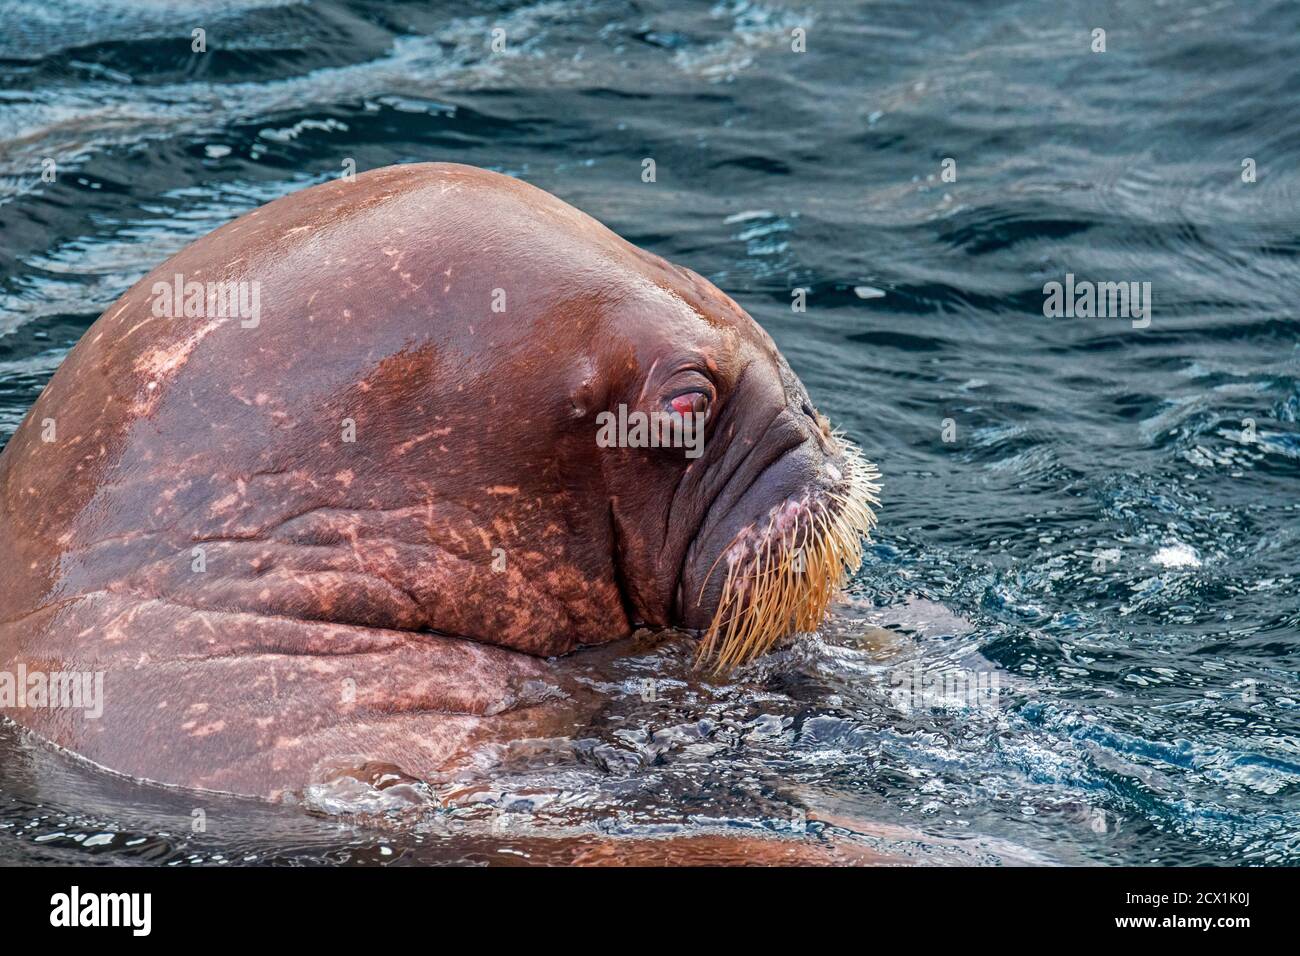 Walrus (Odobenus rosmarus) swimming in water, close up of head showing whiskers / vibrissae Stock Photo